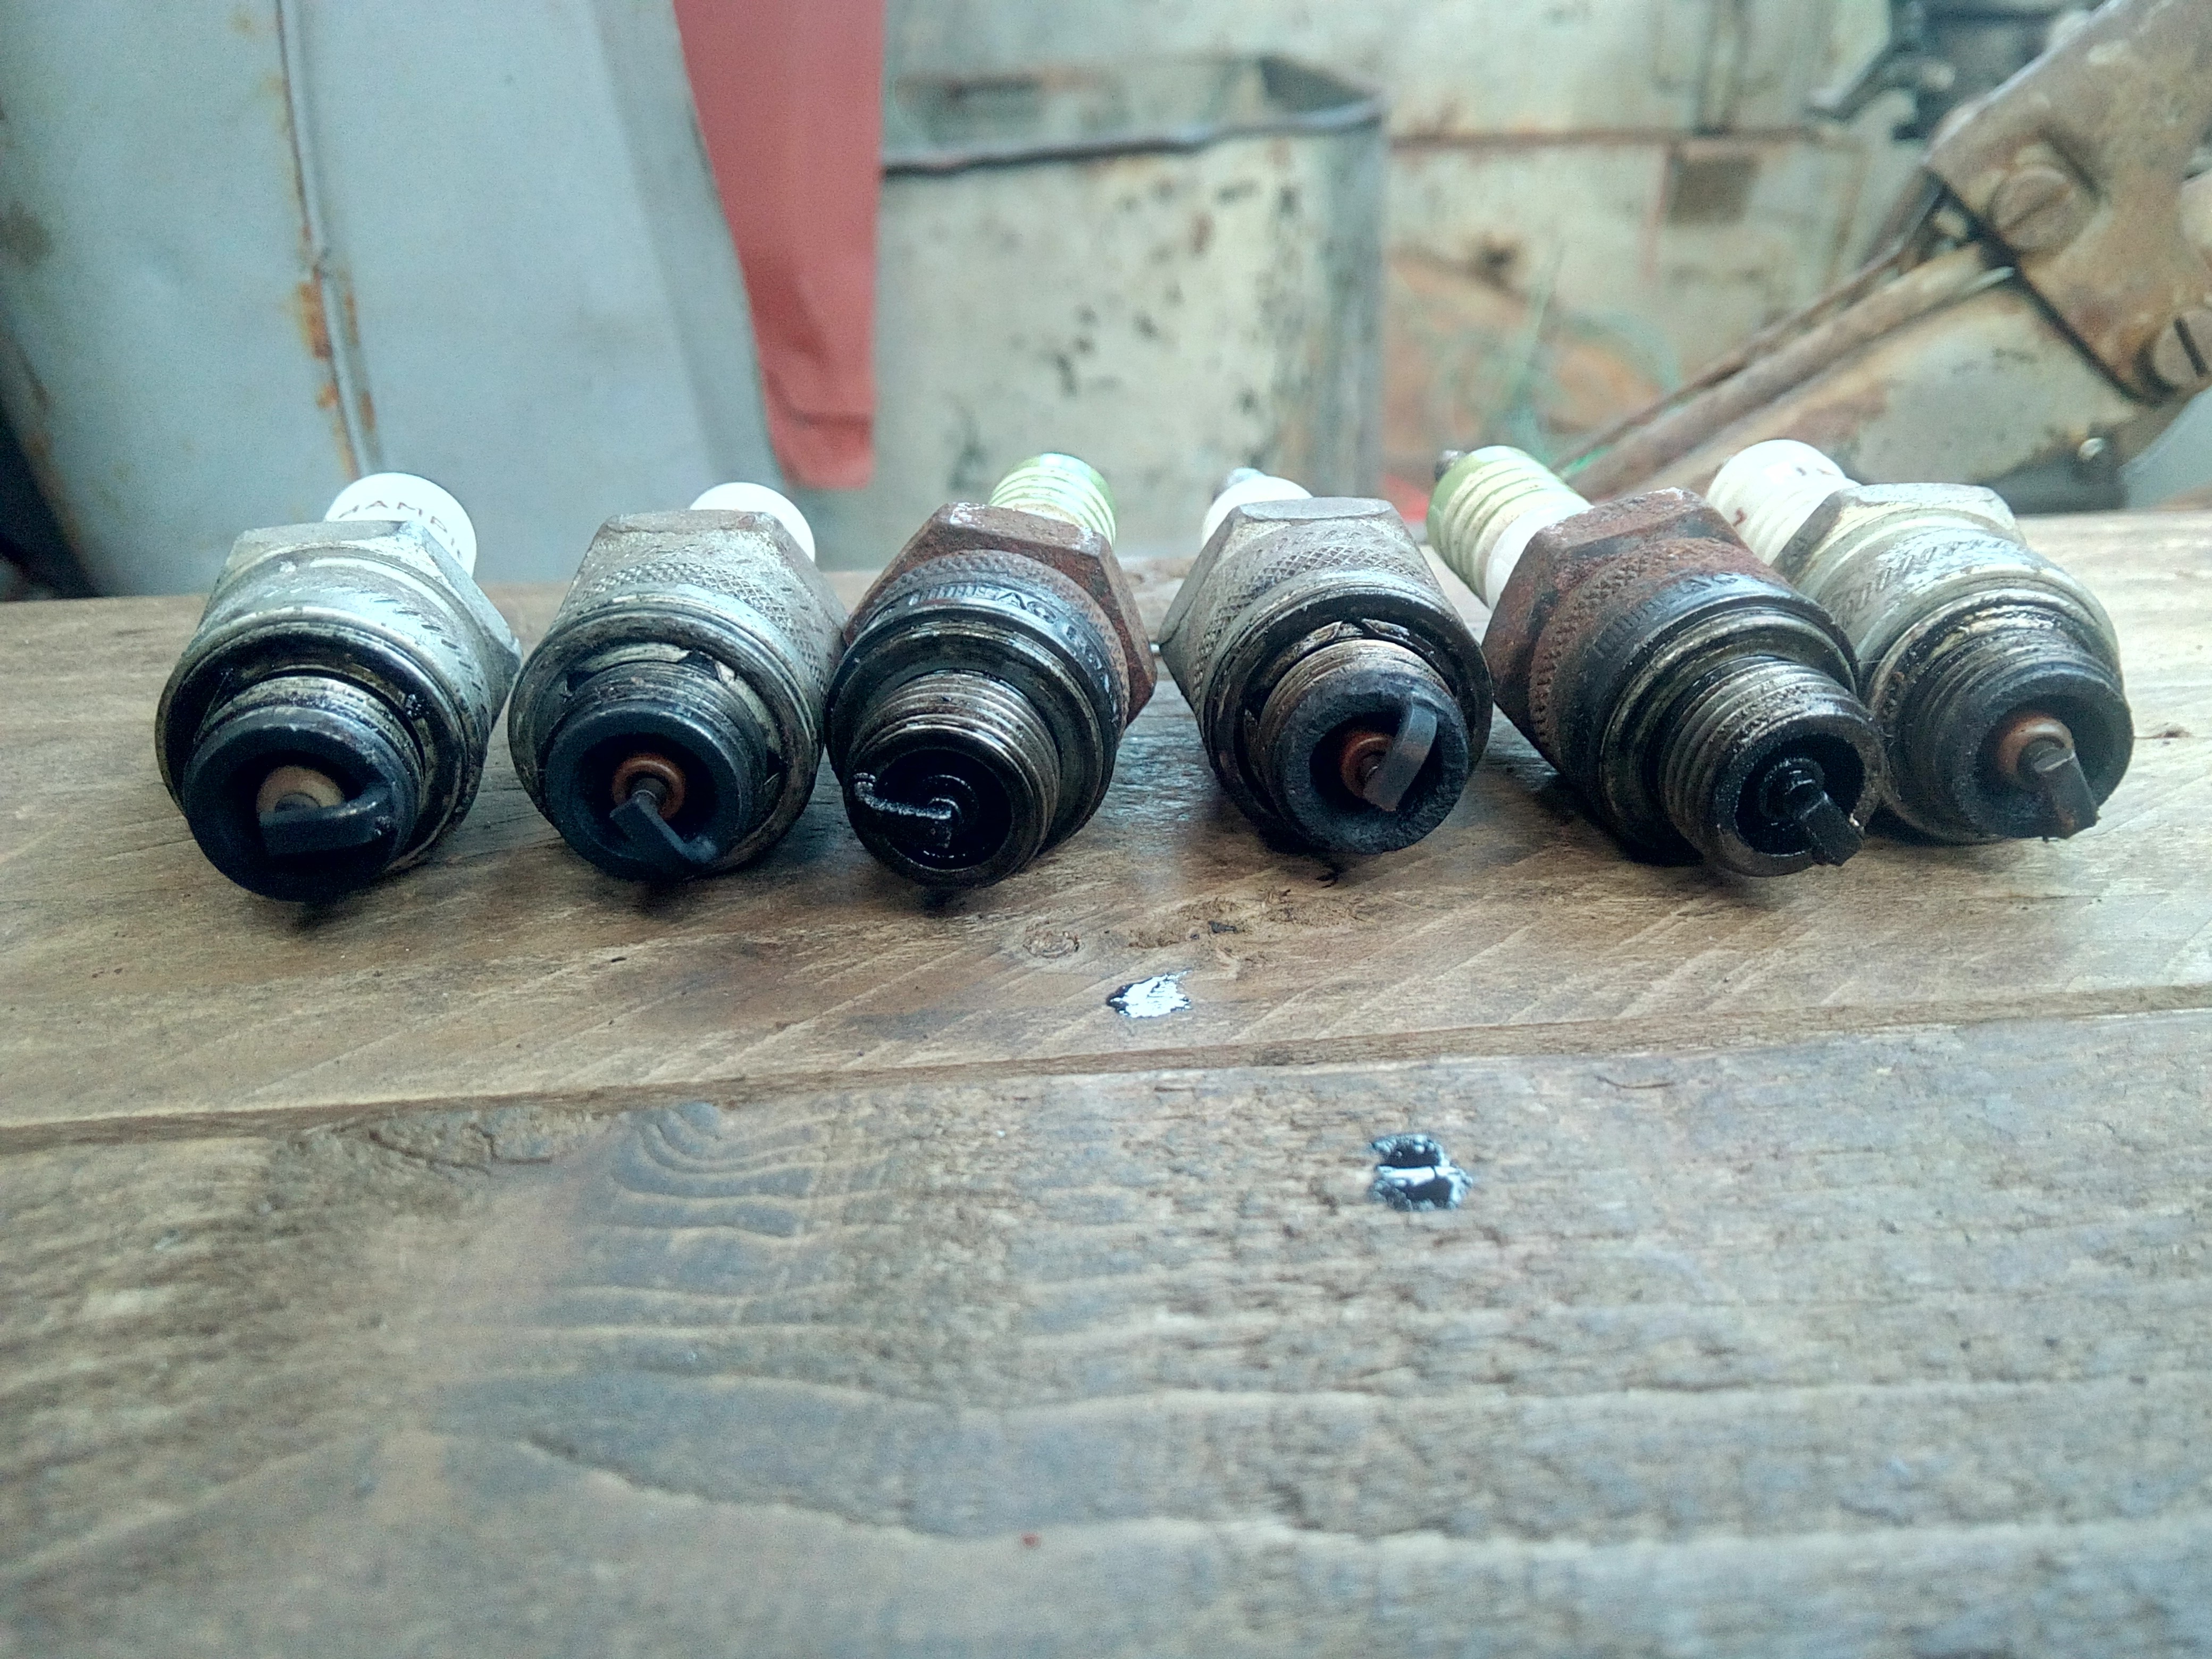 Old spark-plugs lined up along a wooden board. They are all dark
and oily.